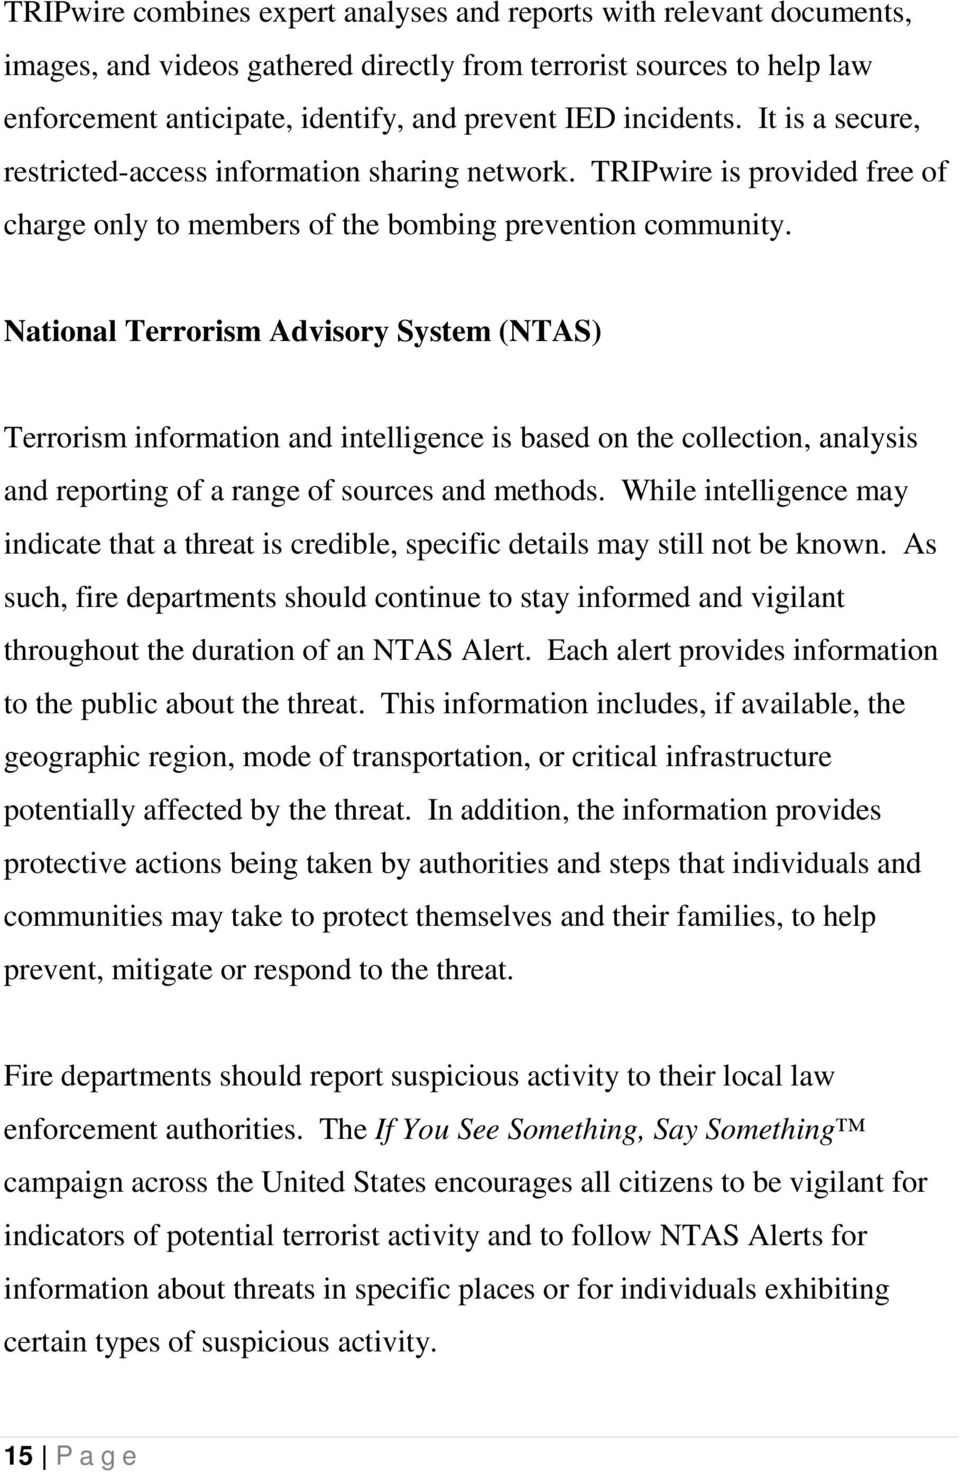 National Terrorism Advisory System (NTAS) Terrorism information and intelligence is based on the collection, analysis and reporting of a range of sources and methods.